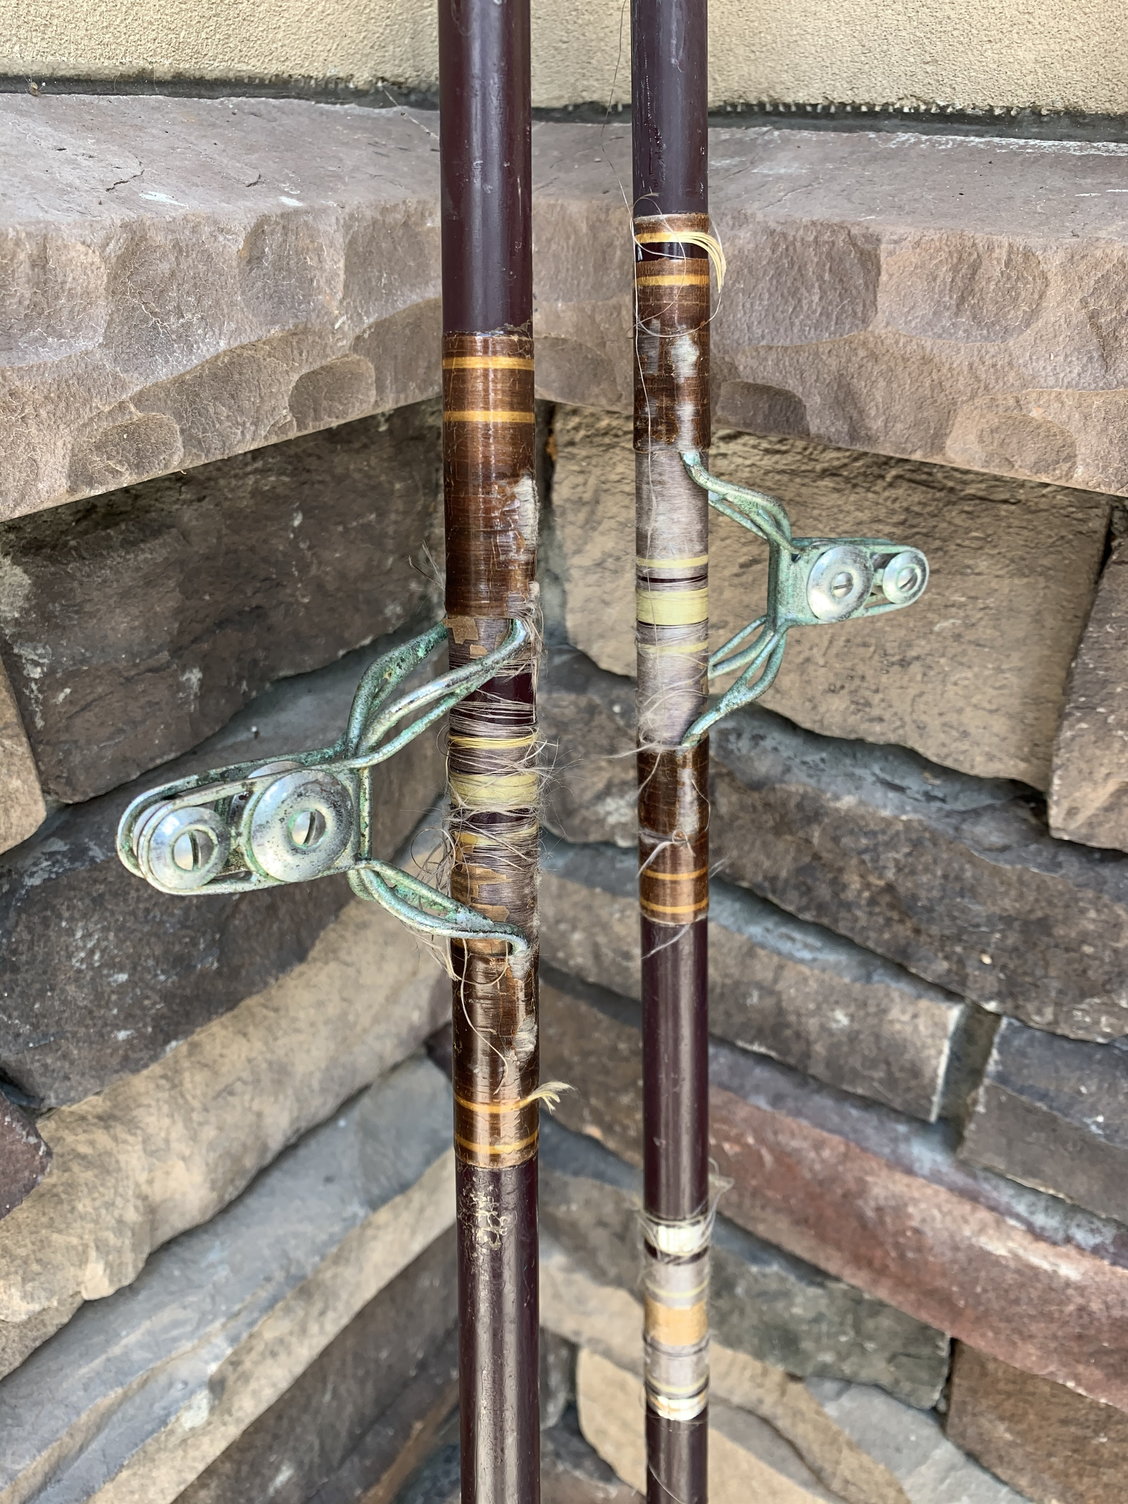 Vintage Rods. What should I do with them? - The Hull Truth - Boating and  Fishing Forum